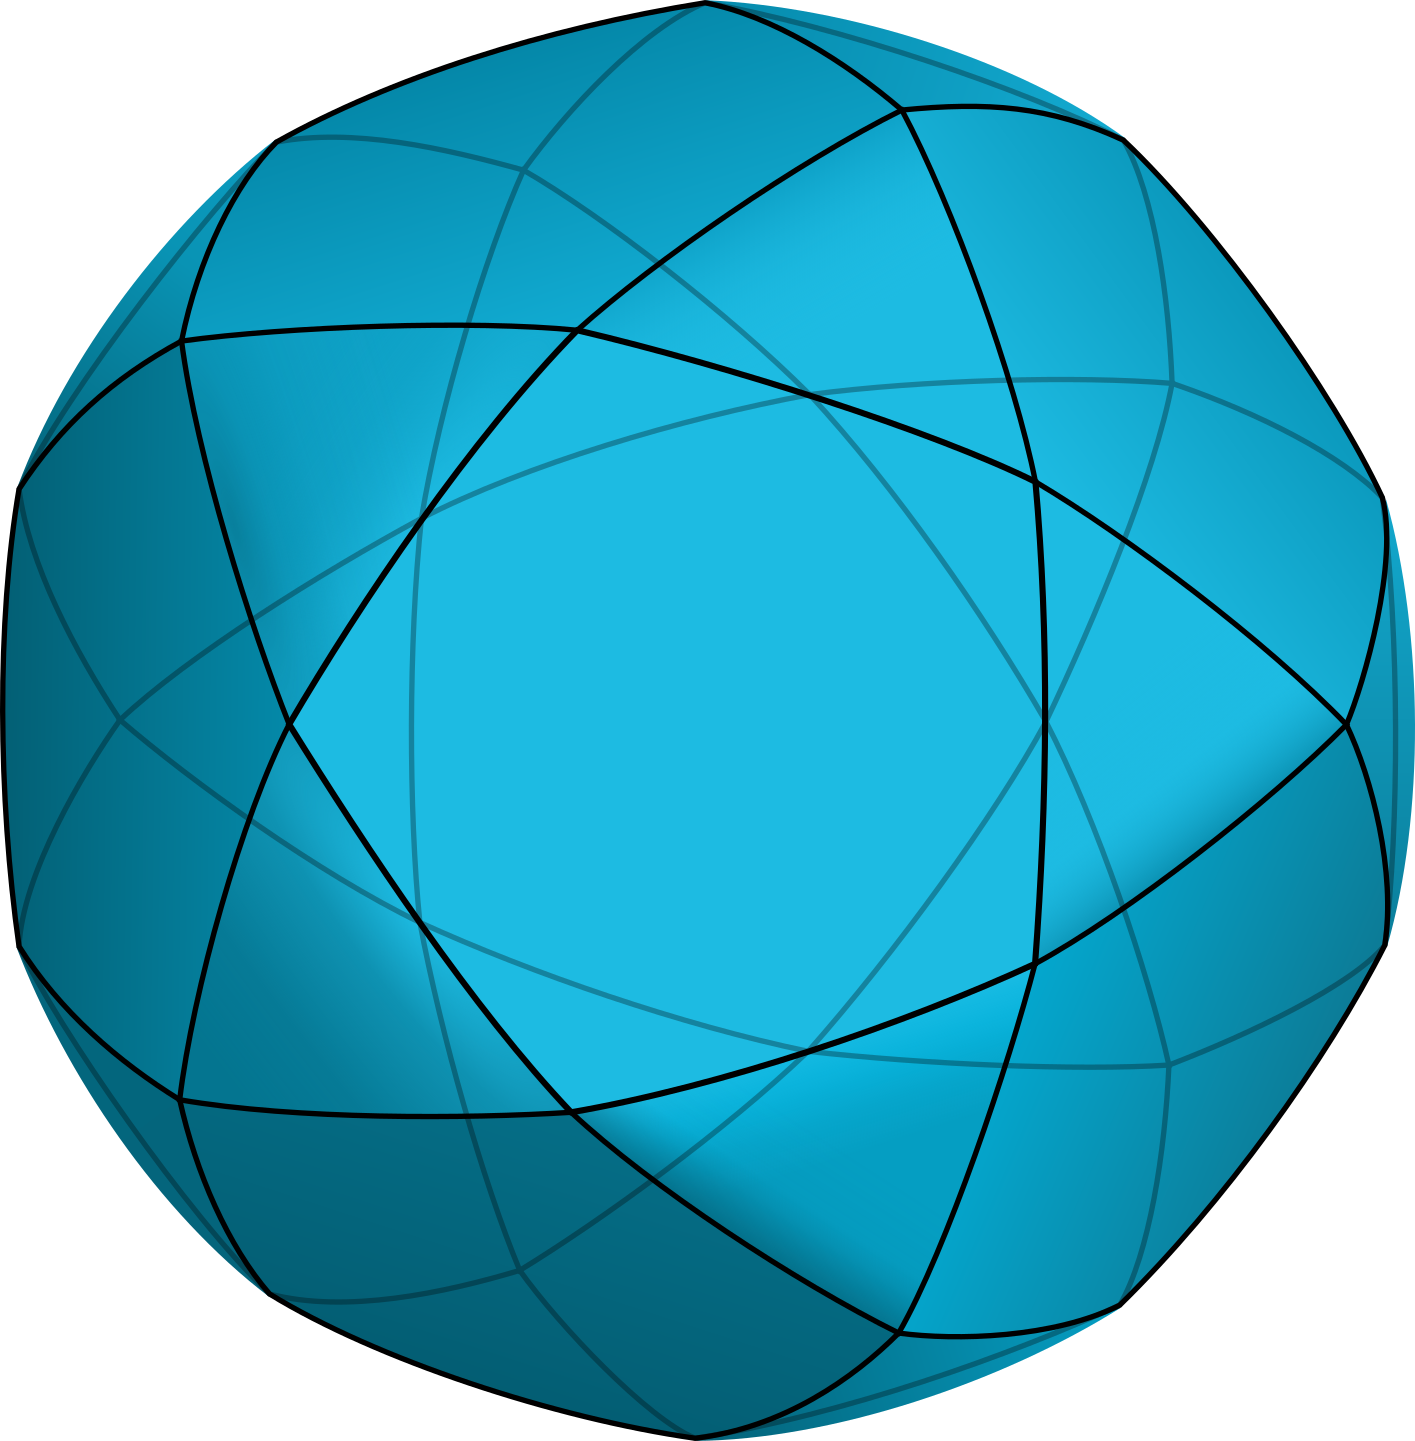 ../_images/intersection_icosahedron.png